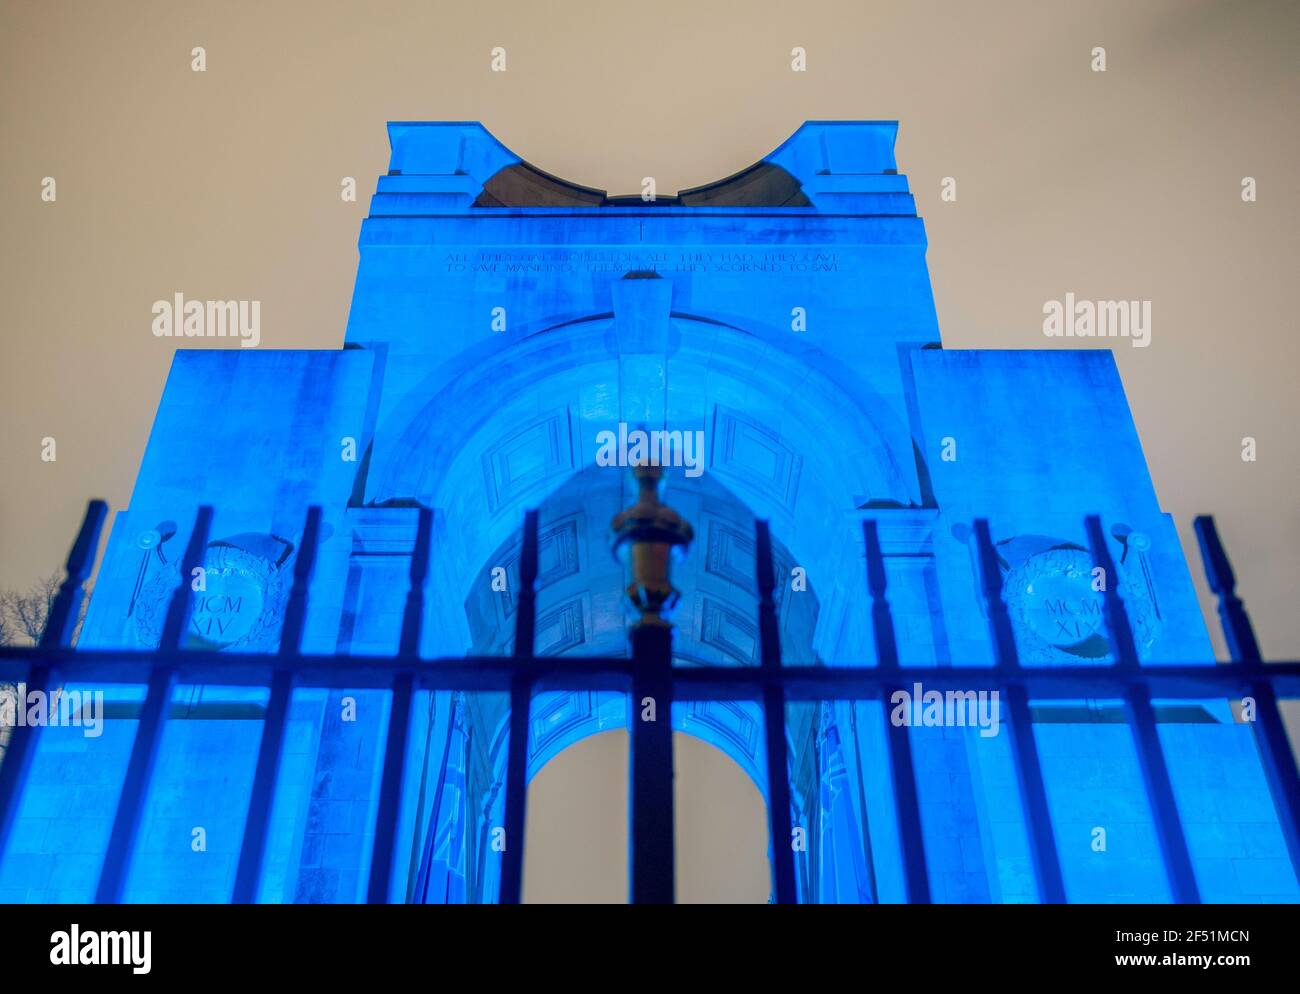 Covid-19 coronavirus pandemic. One Year On: Leicester Remembers. The city that has suffered the worst lockdown restrictions in the UK marks one year of lockdown by illuminating Leicester War Memorial in blue light in honour of NHS and all key workers. Stock Photo